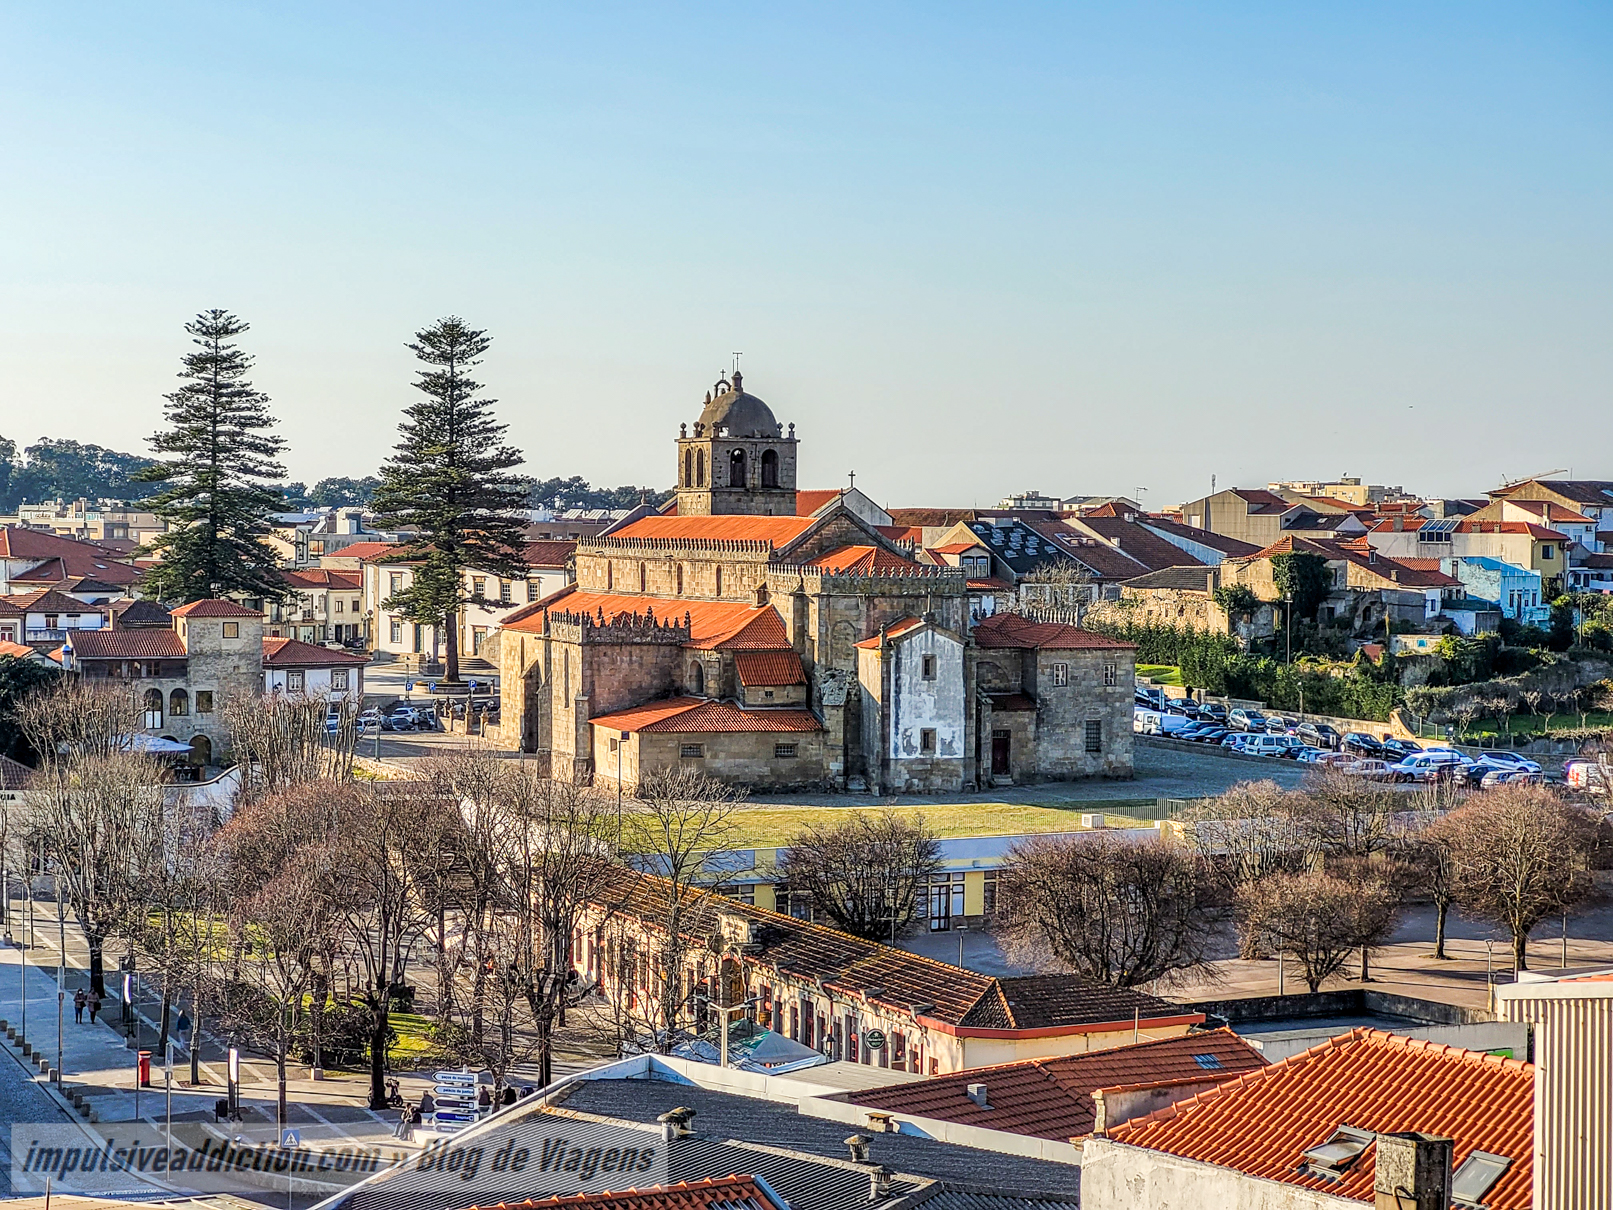 Mother Church of Vila do Conde (from the viewpoint)